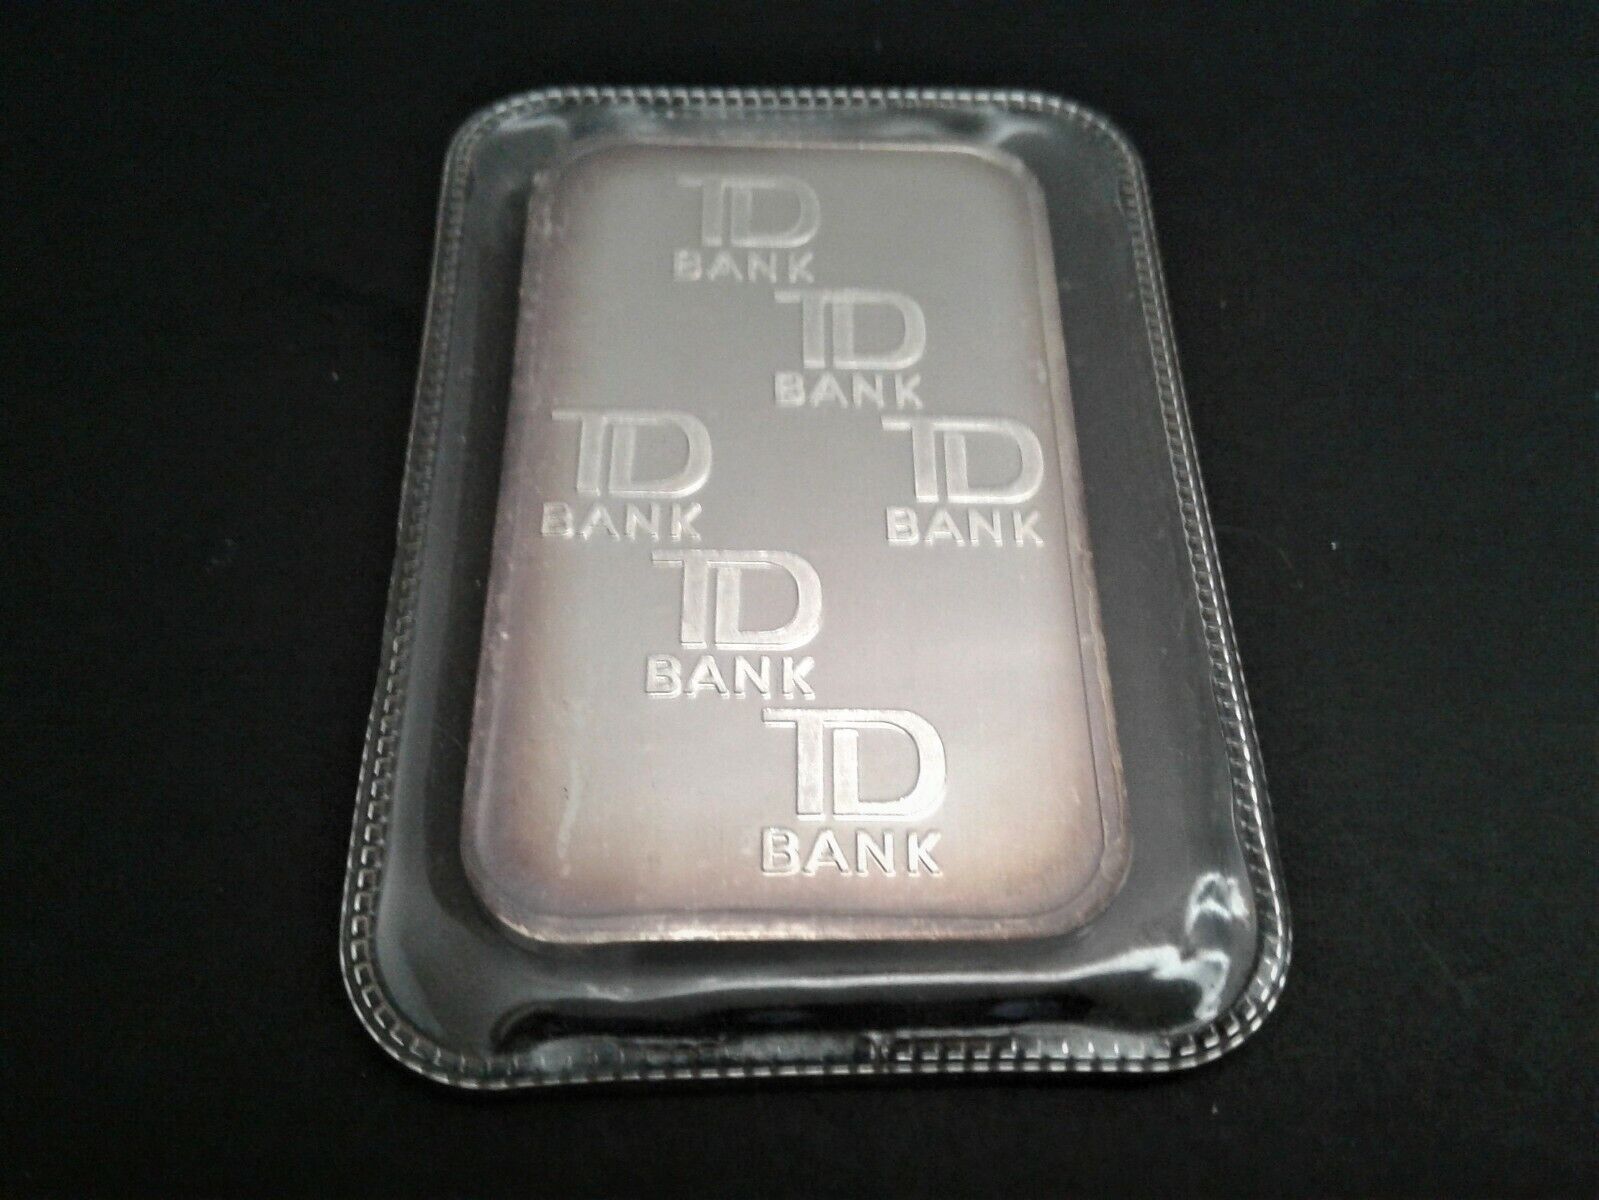 TD Bank Johnson Matthey - 1 Troy Ounce Silver Bar - Vintage Collectable